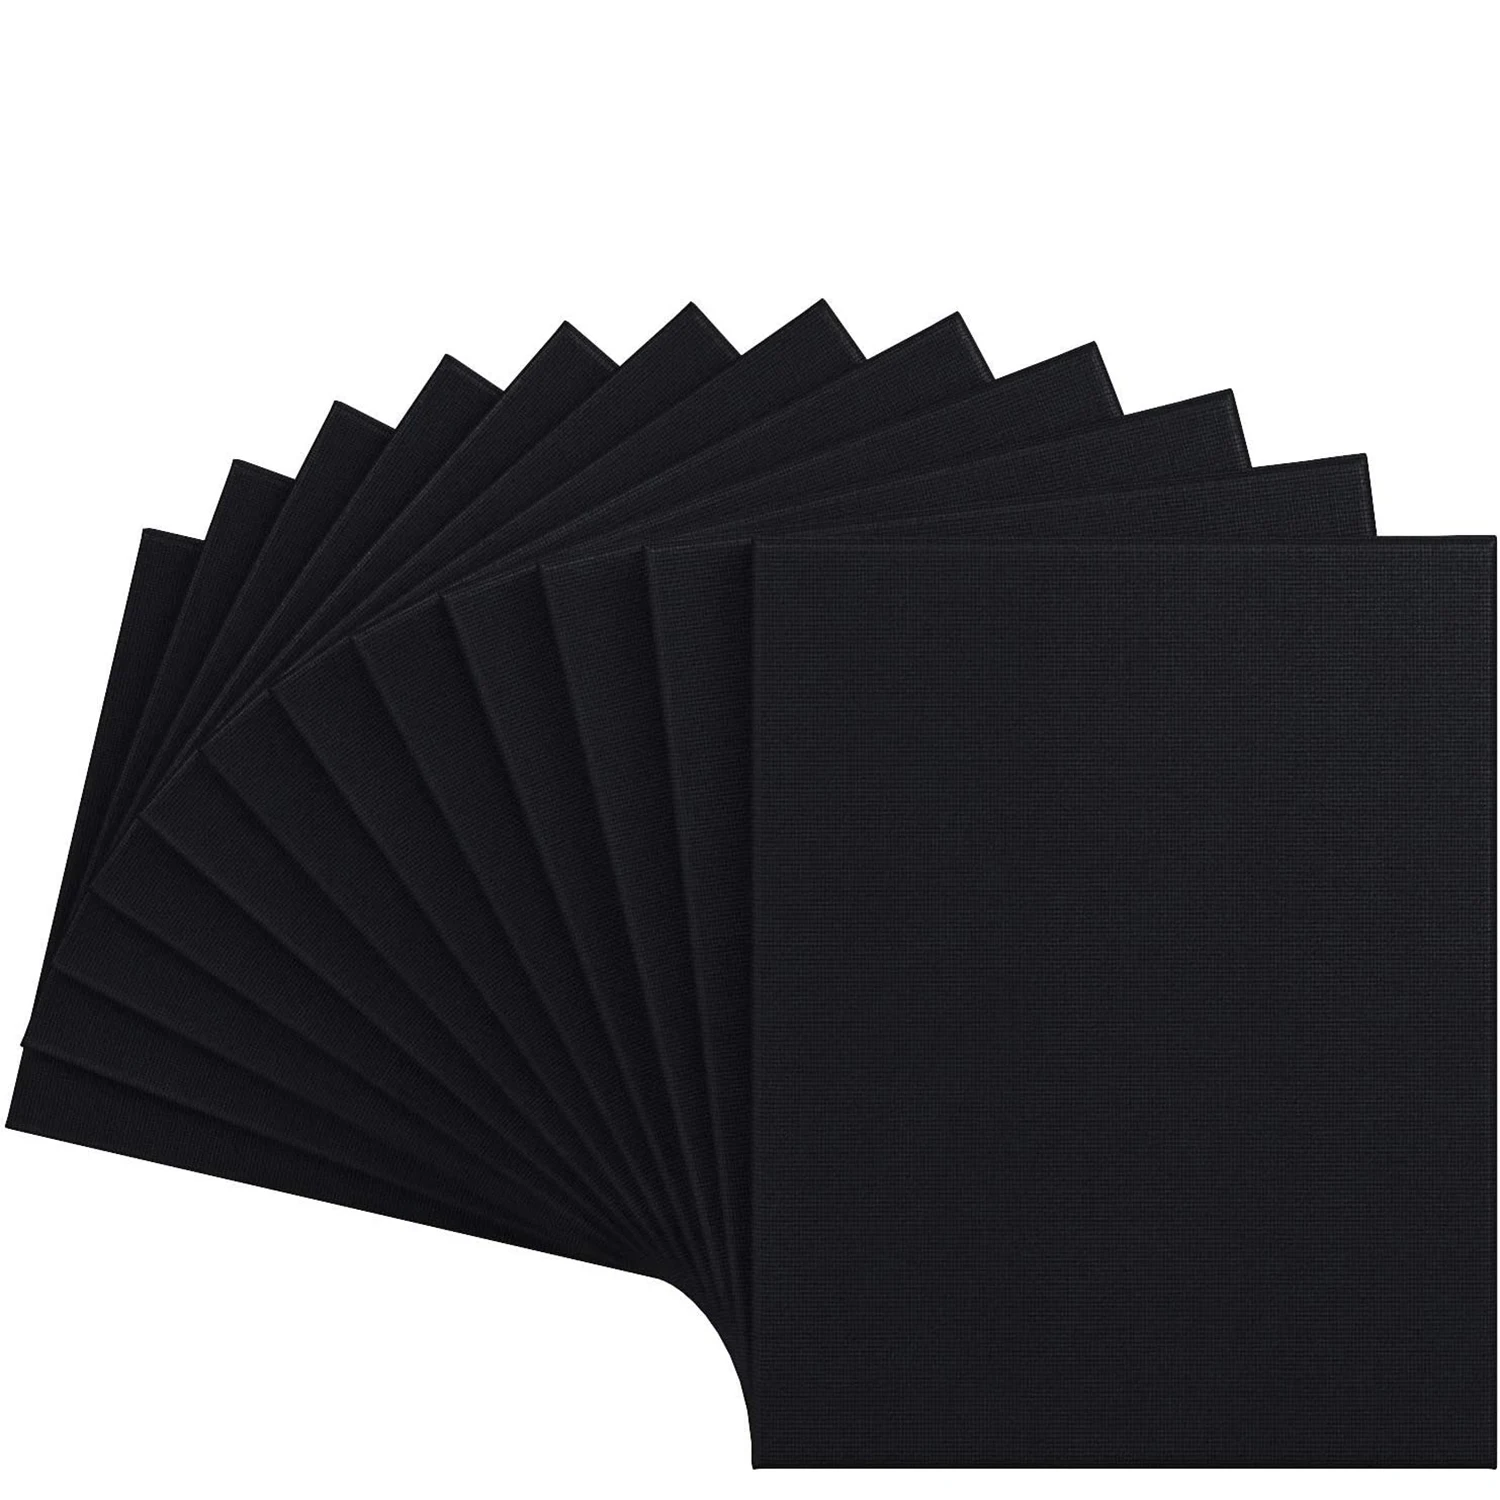 Black Stretched Canvas for Painting 4pcs Primed 100% Cotton Artist